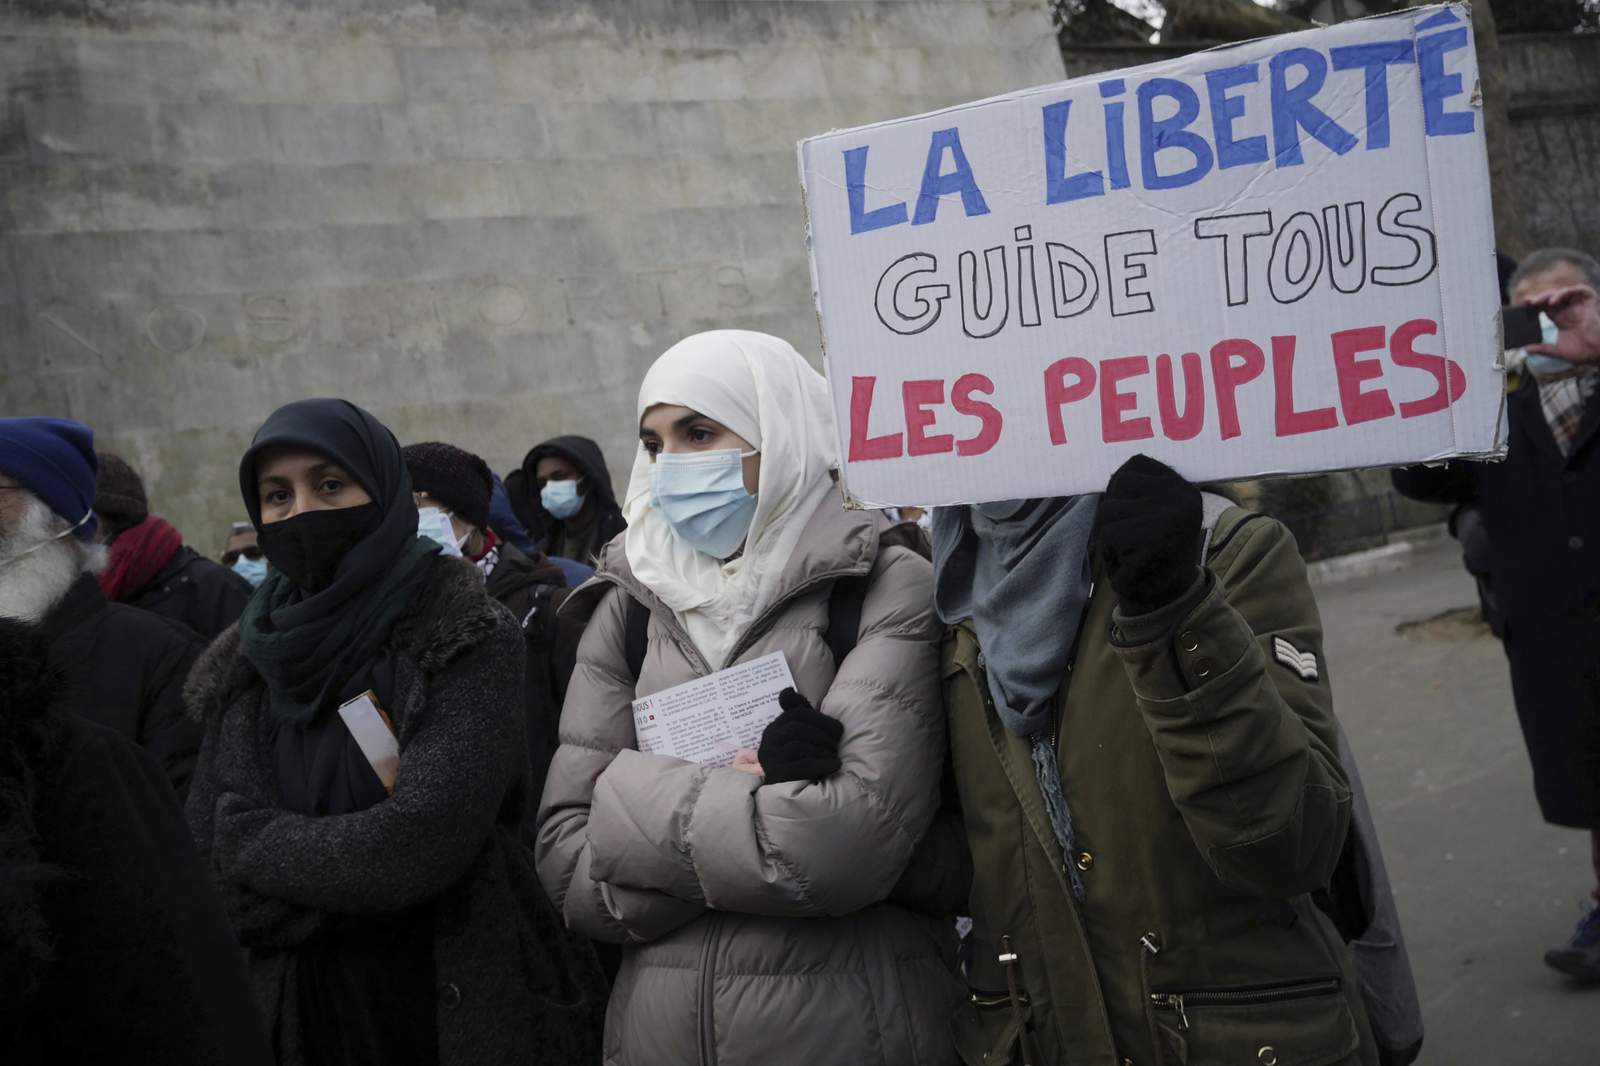 Protesters say French anti-radicalism law is anti-Muslim